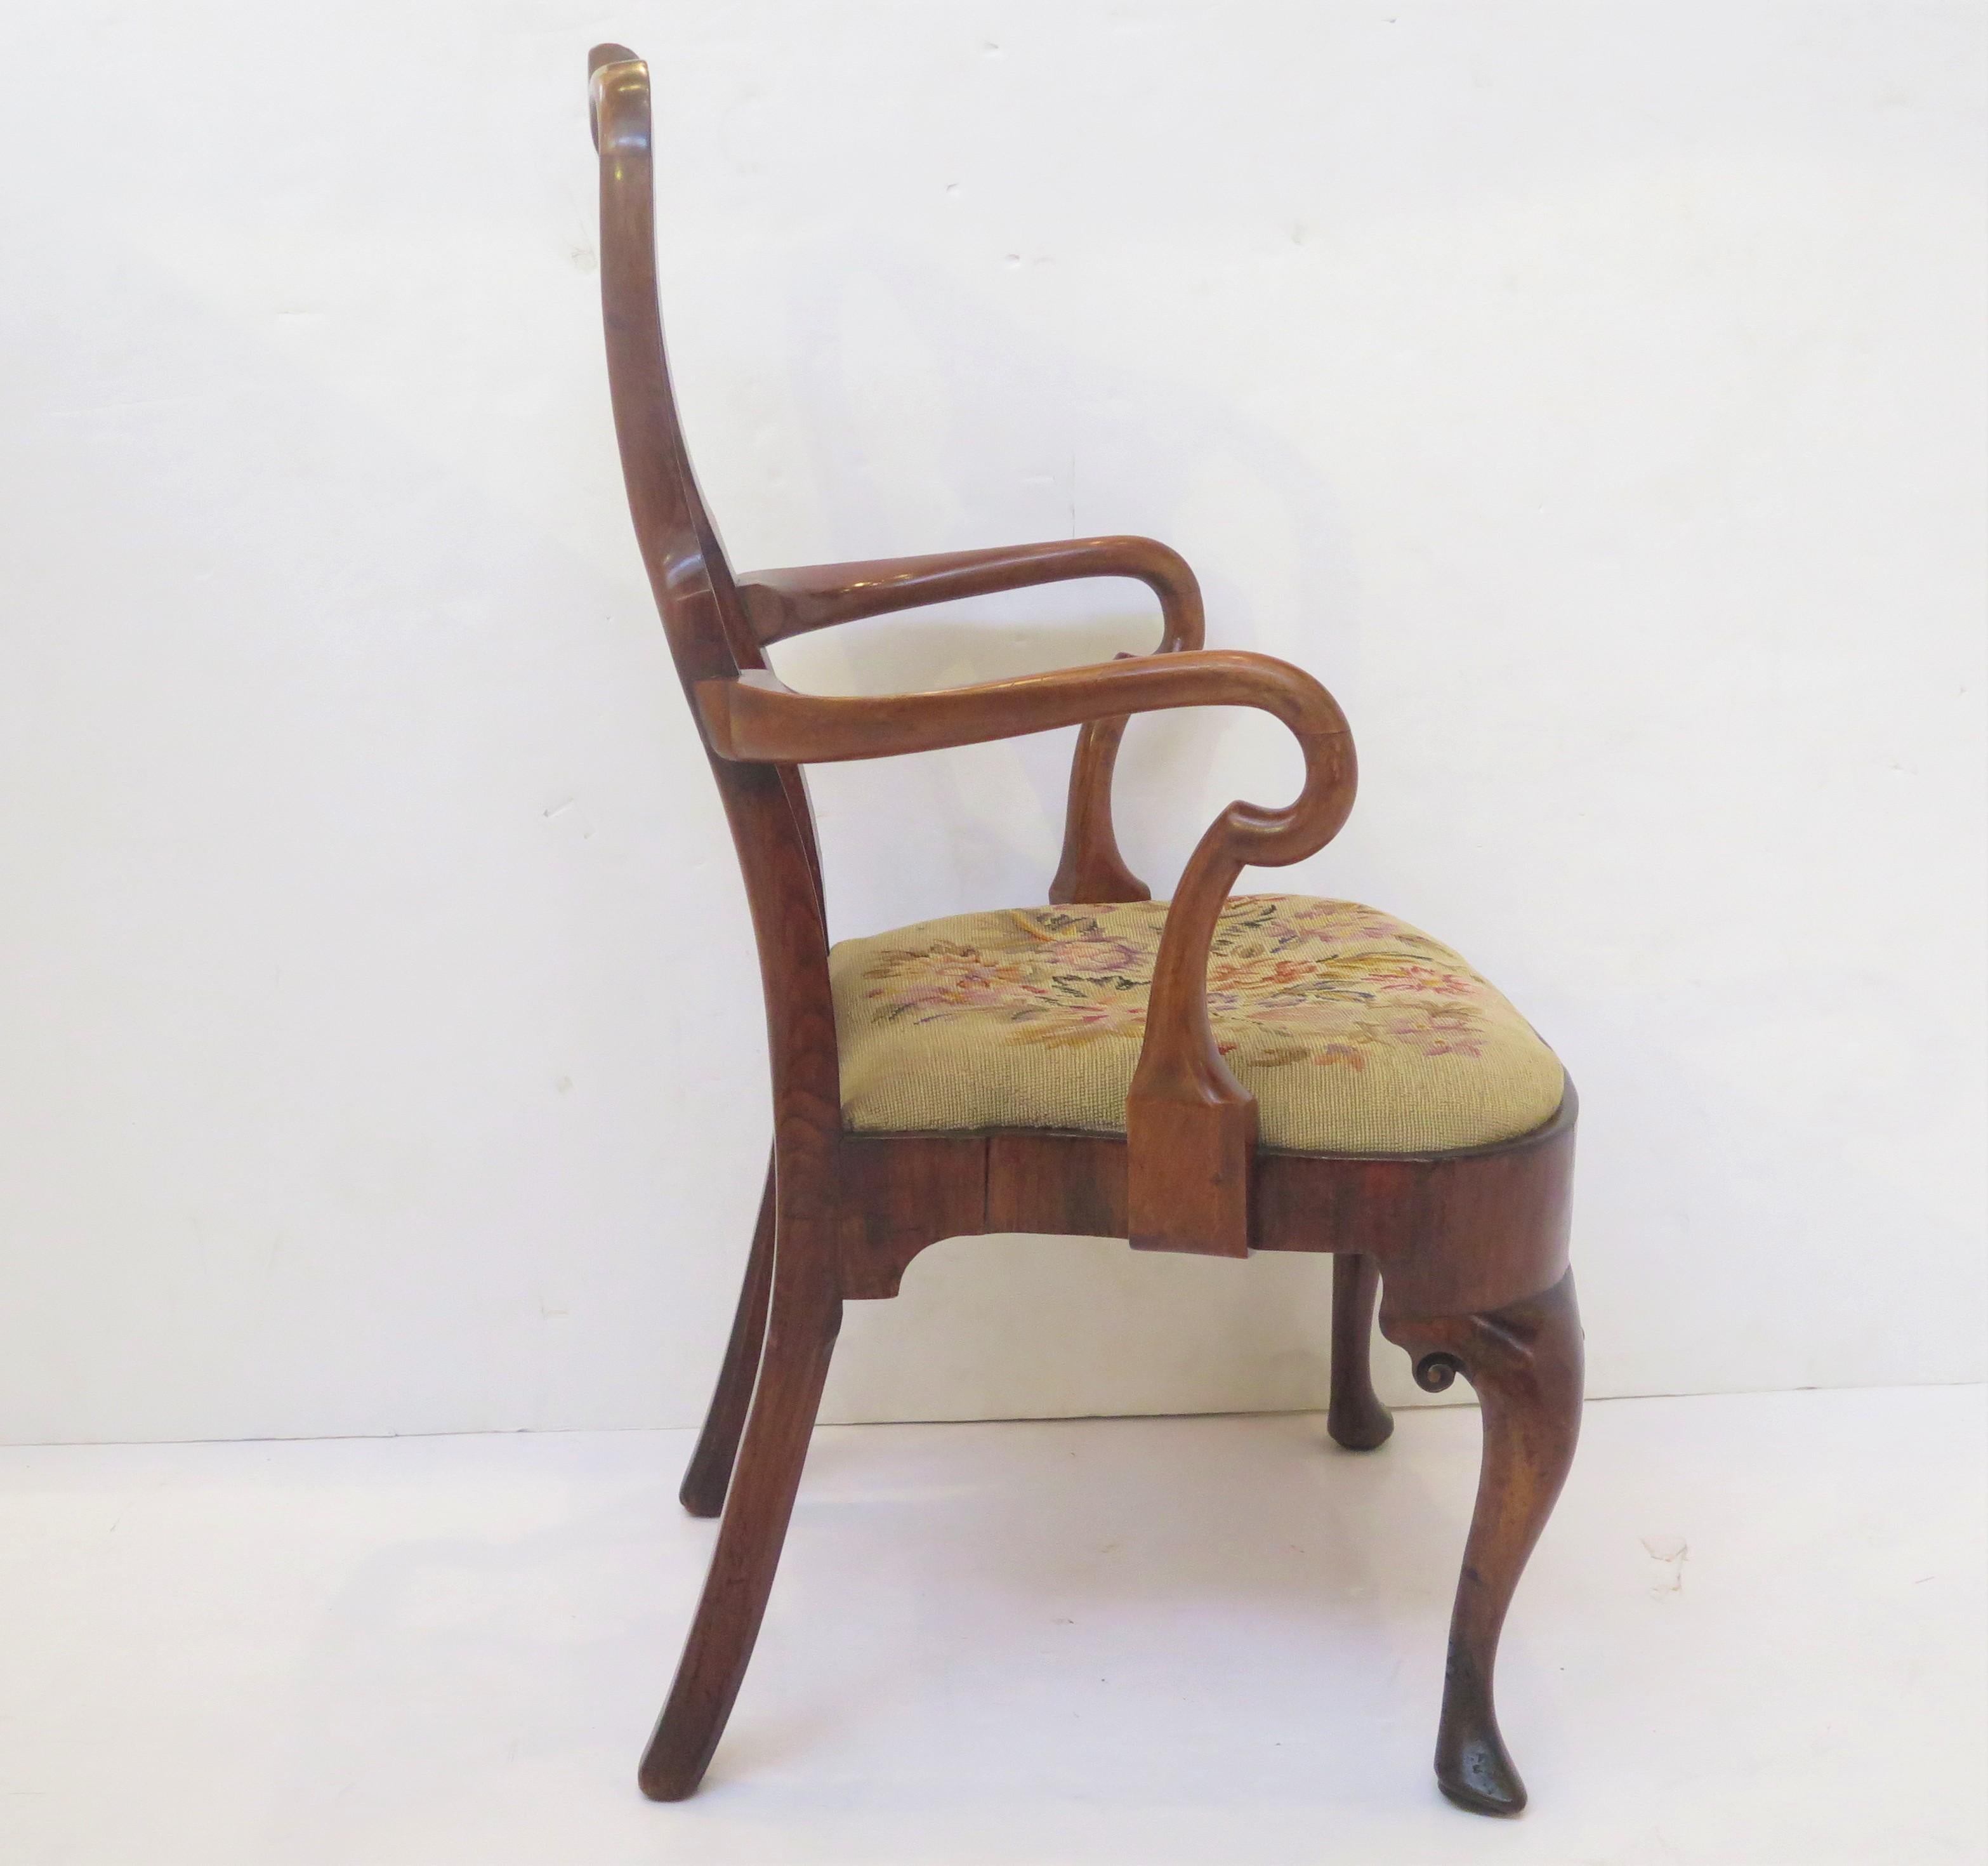 a handsome George II walnut open armchair / elbow chair, the shaped crest rail and supports centered by a vasiform splat, shepherd's crook arms, padded floral needlework slip seat above a shaped apron on tapering cabriole legs with slipper / pointed